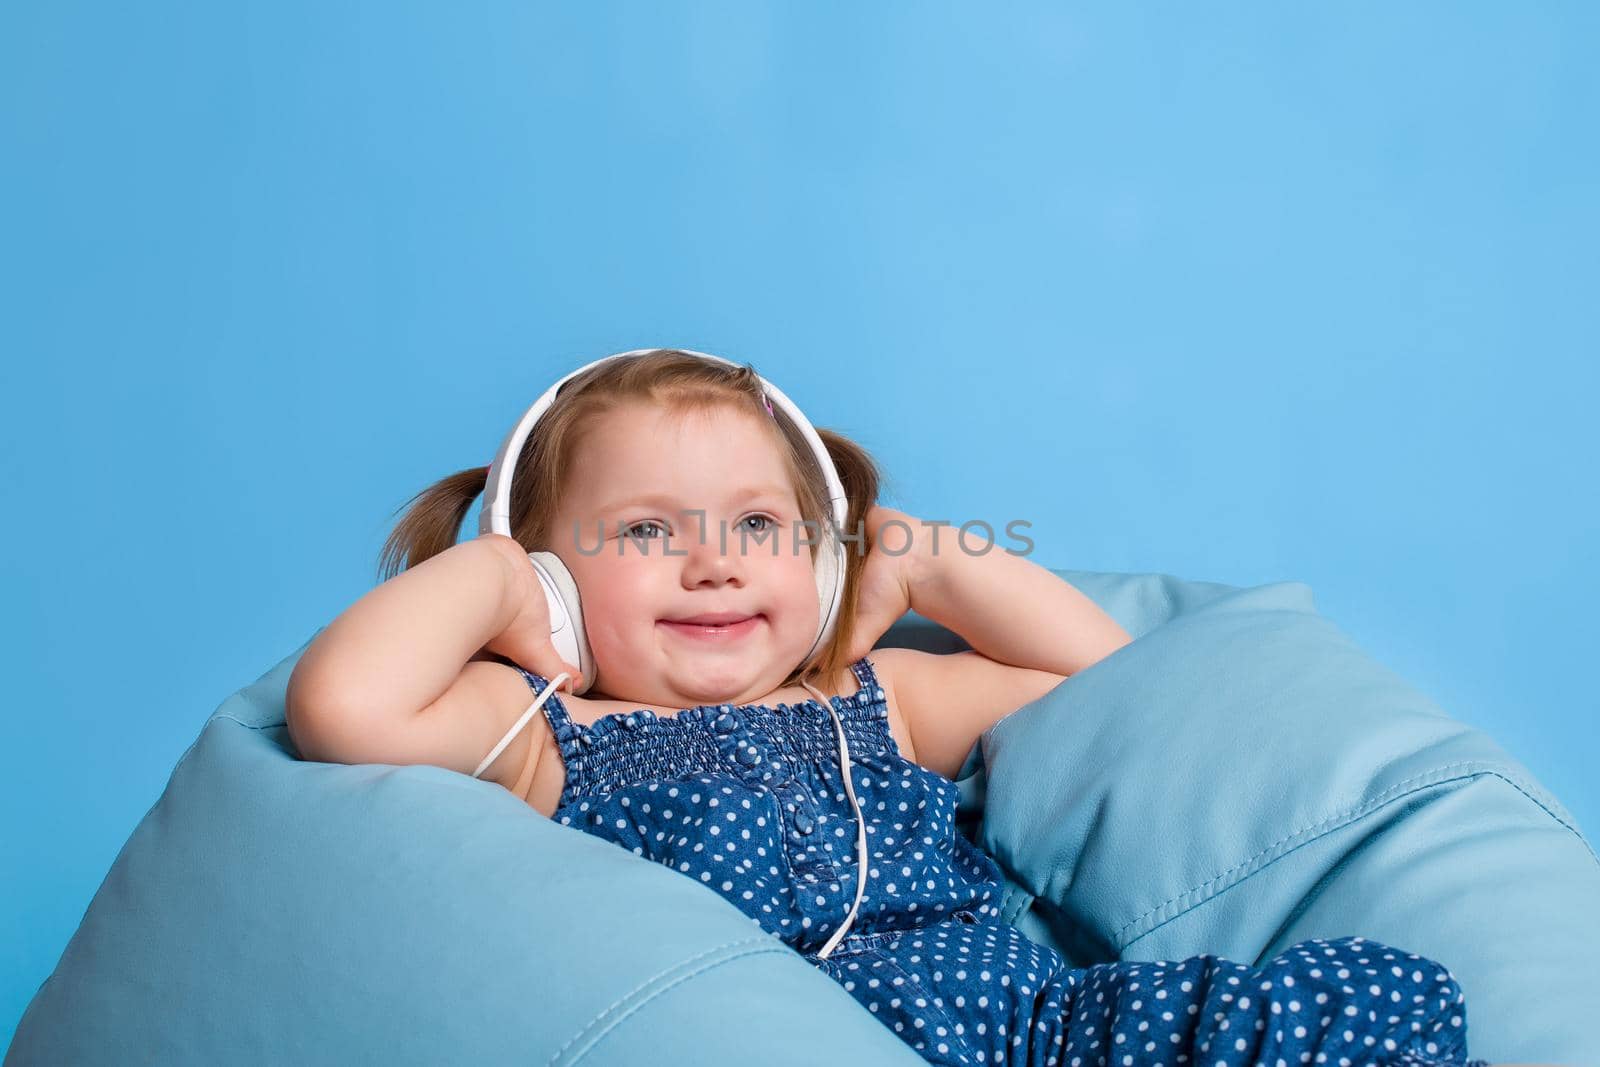 Cute little girl in headphones listening to music using a tablet and smiling while sitting on blue big bag. On blue background.